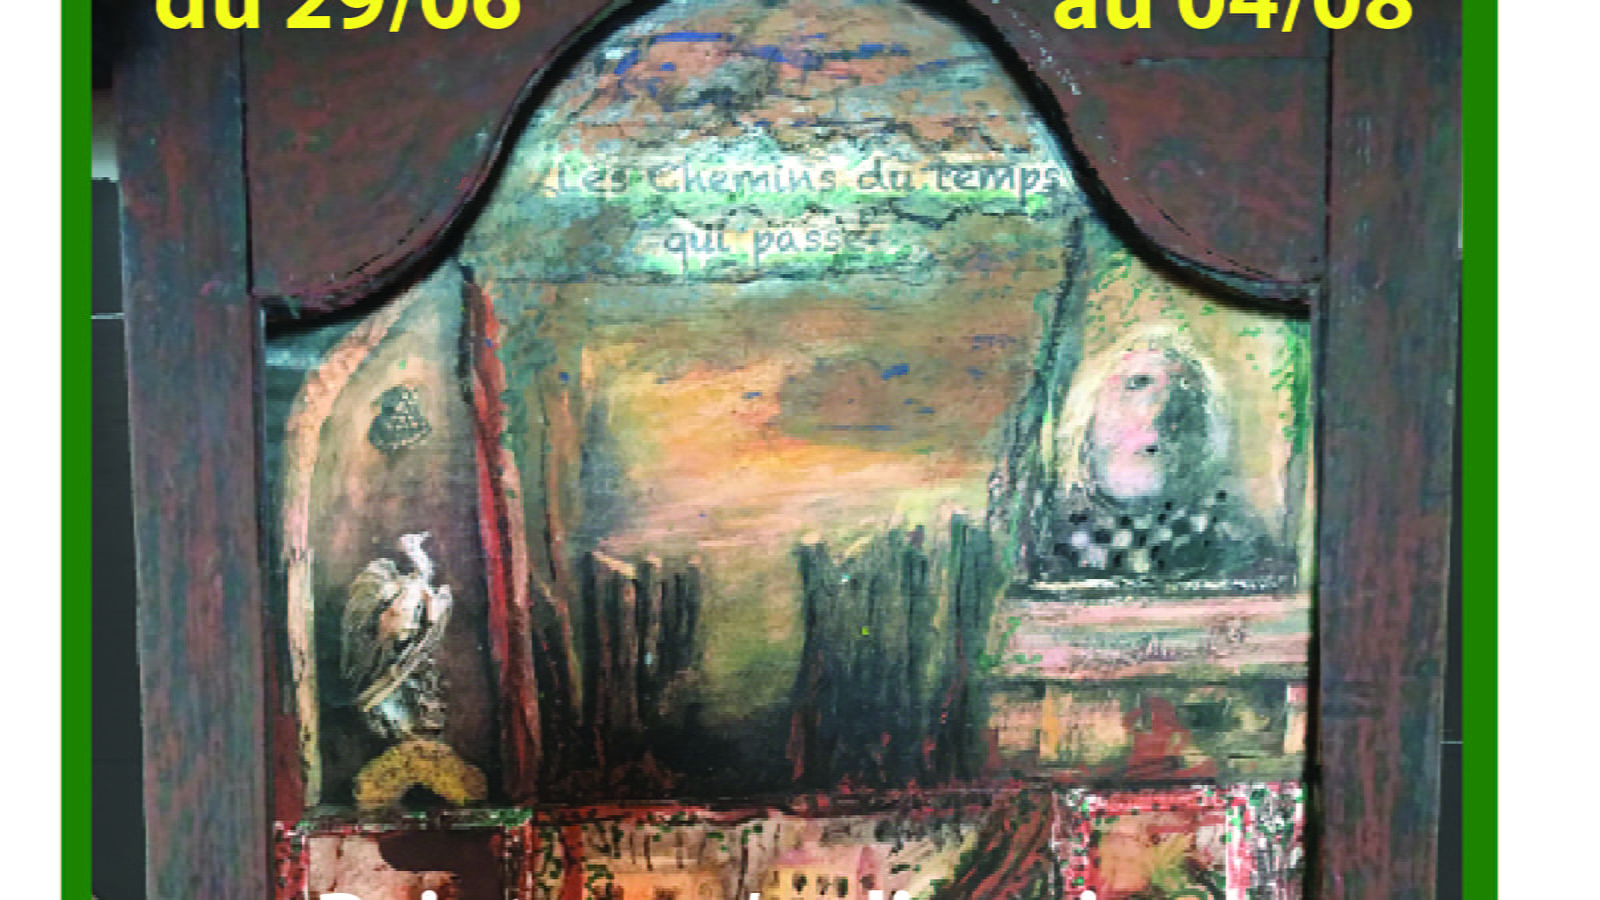 The MOIZIARD Andrée and Jean. Exhibition of paintings and reliquaries. 'The paths of passing time'. Singular artists, a universe to discover.